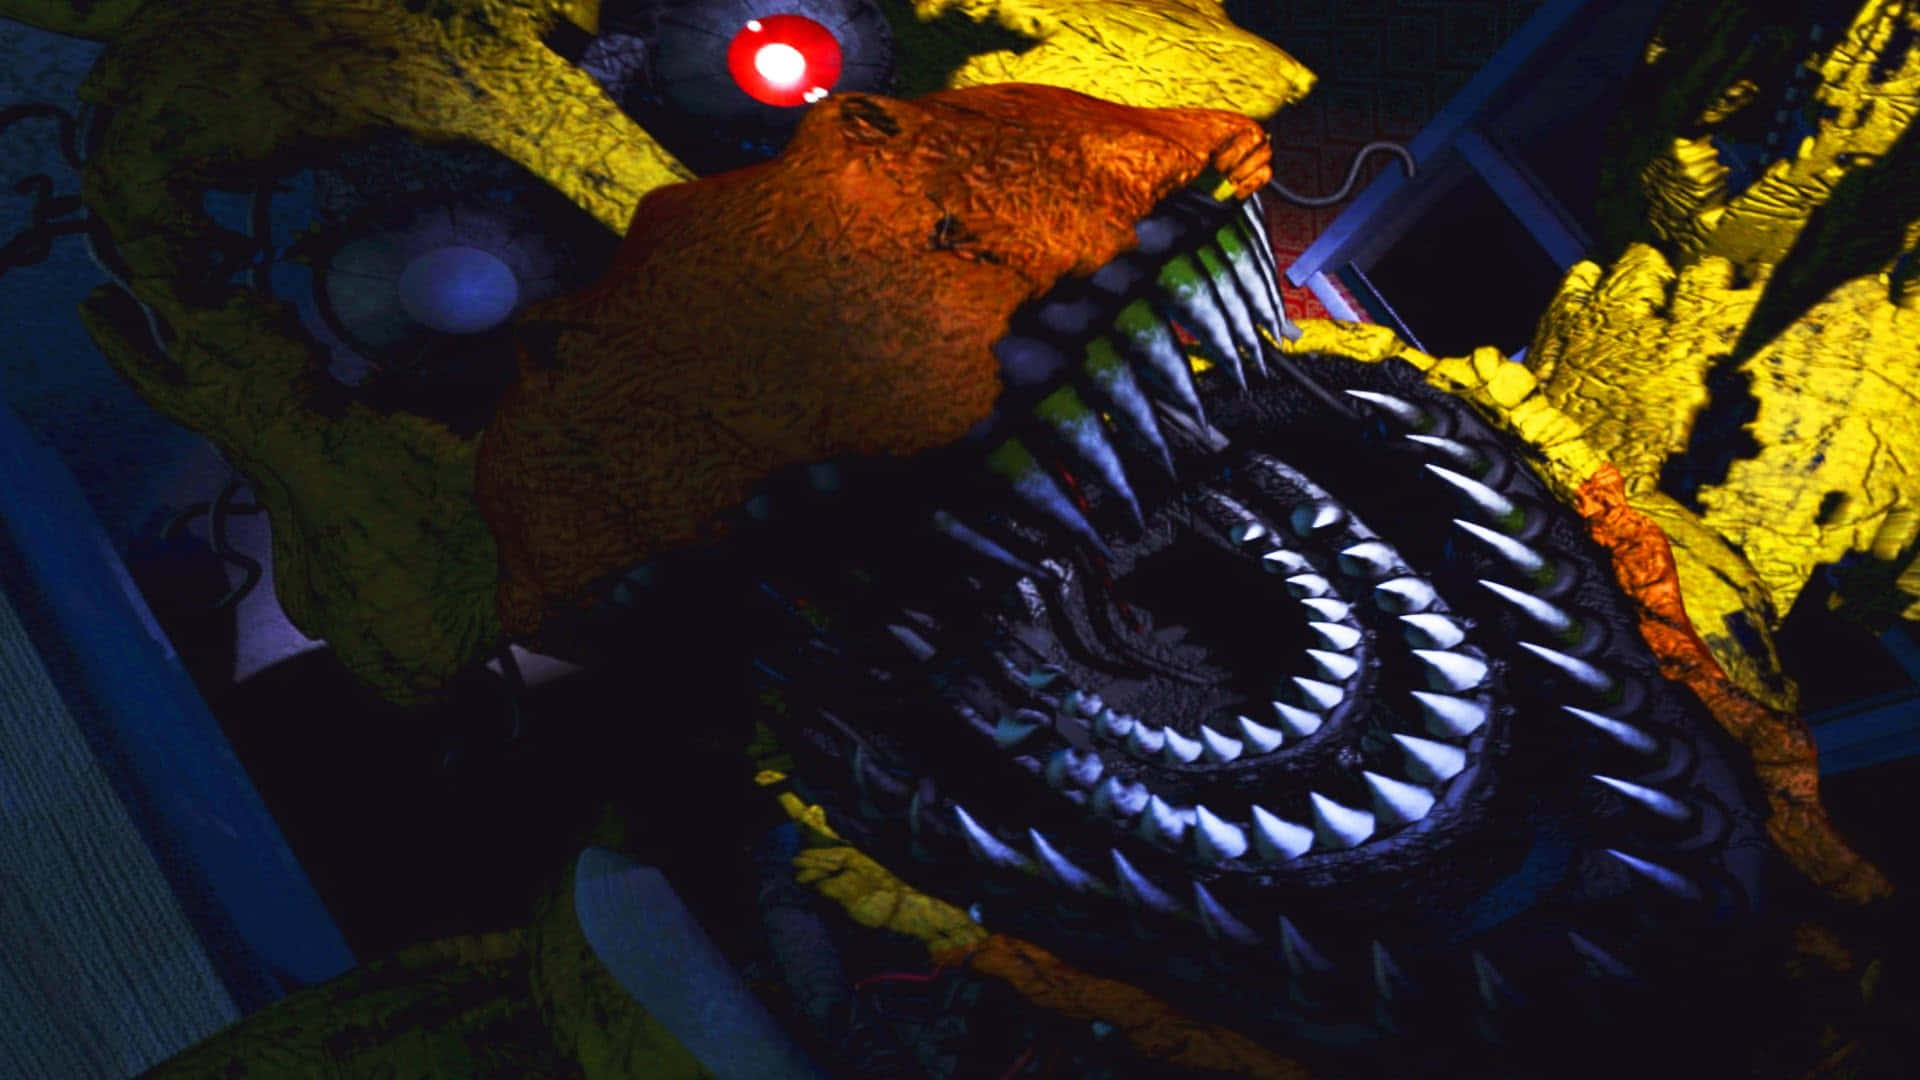 Get ready for intense thrills and chills in Five Nights At Freddys 4 Wallpaper